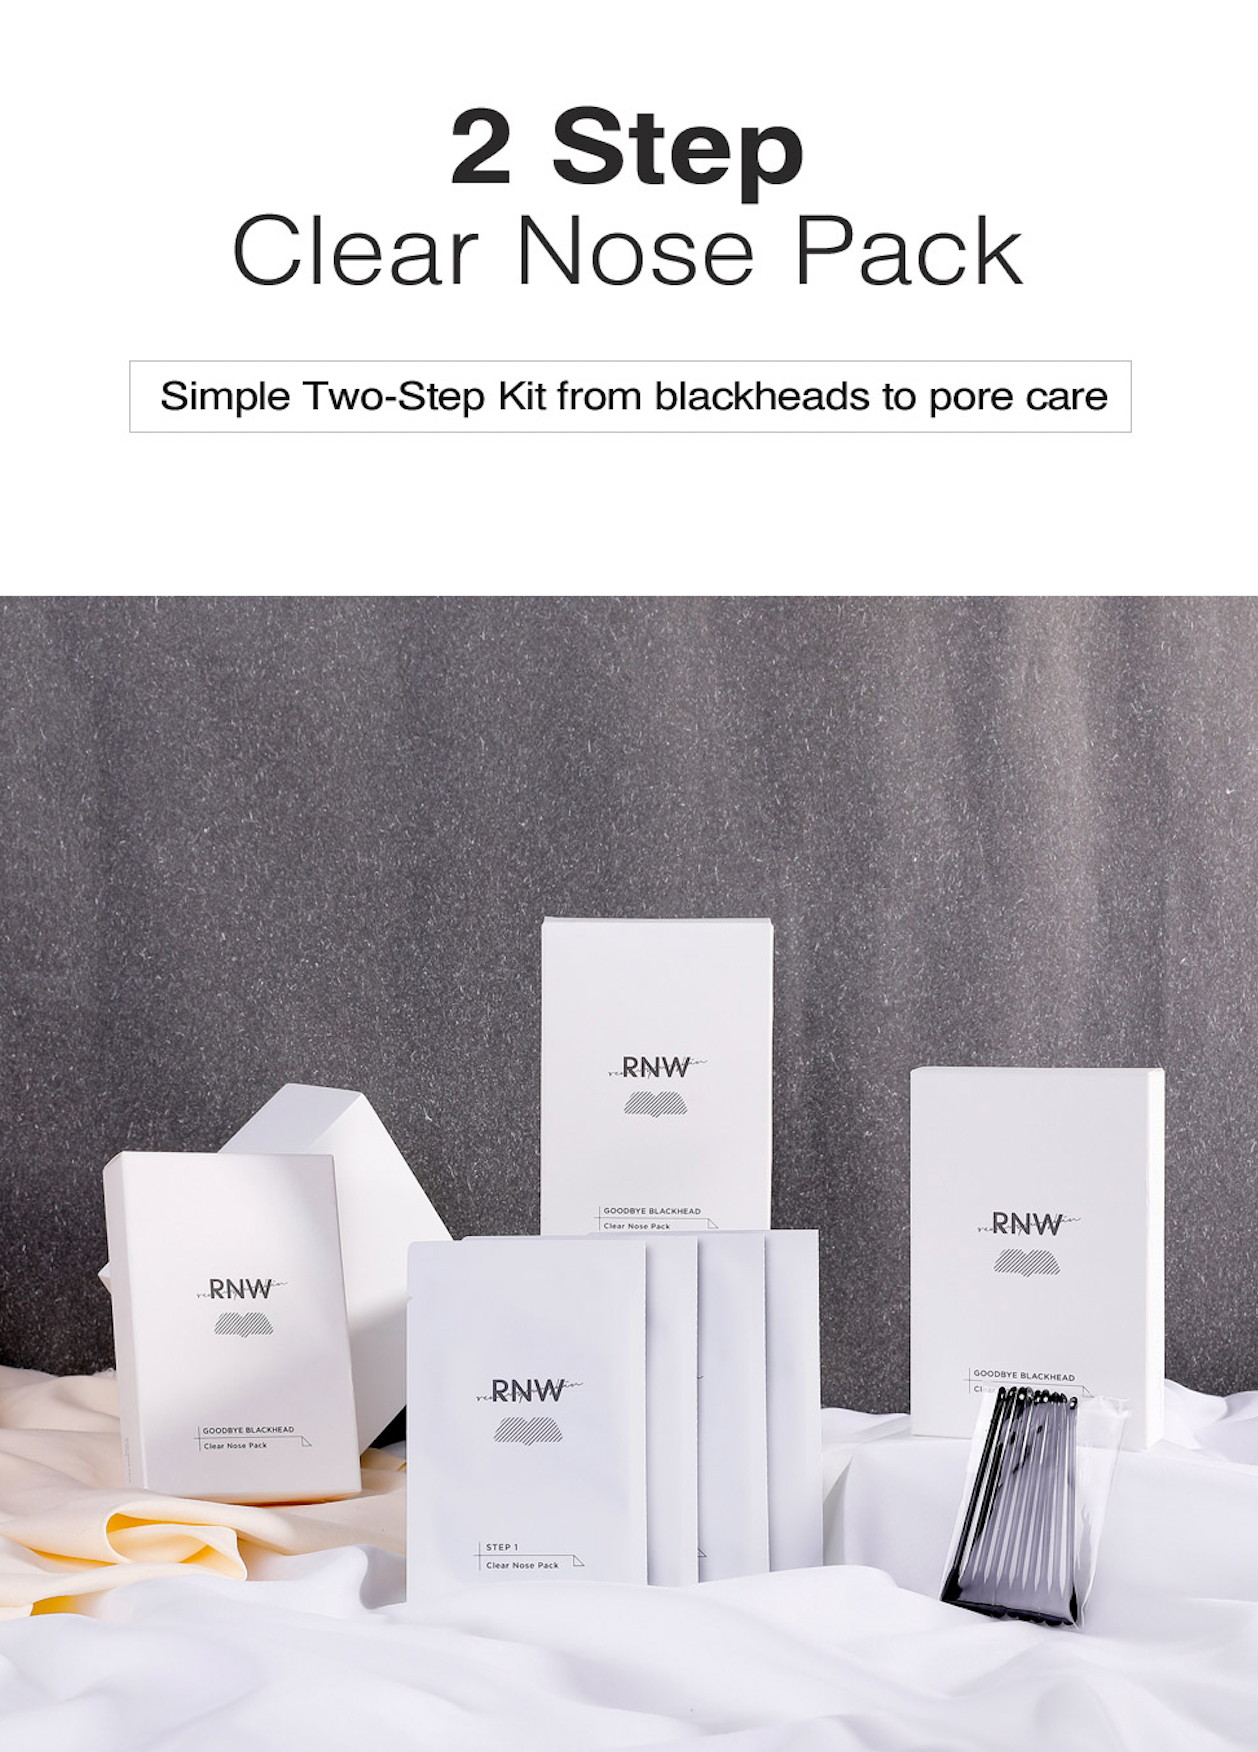 RNW-2-STEP-CLEAR-NOSE-PACK